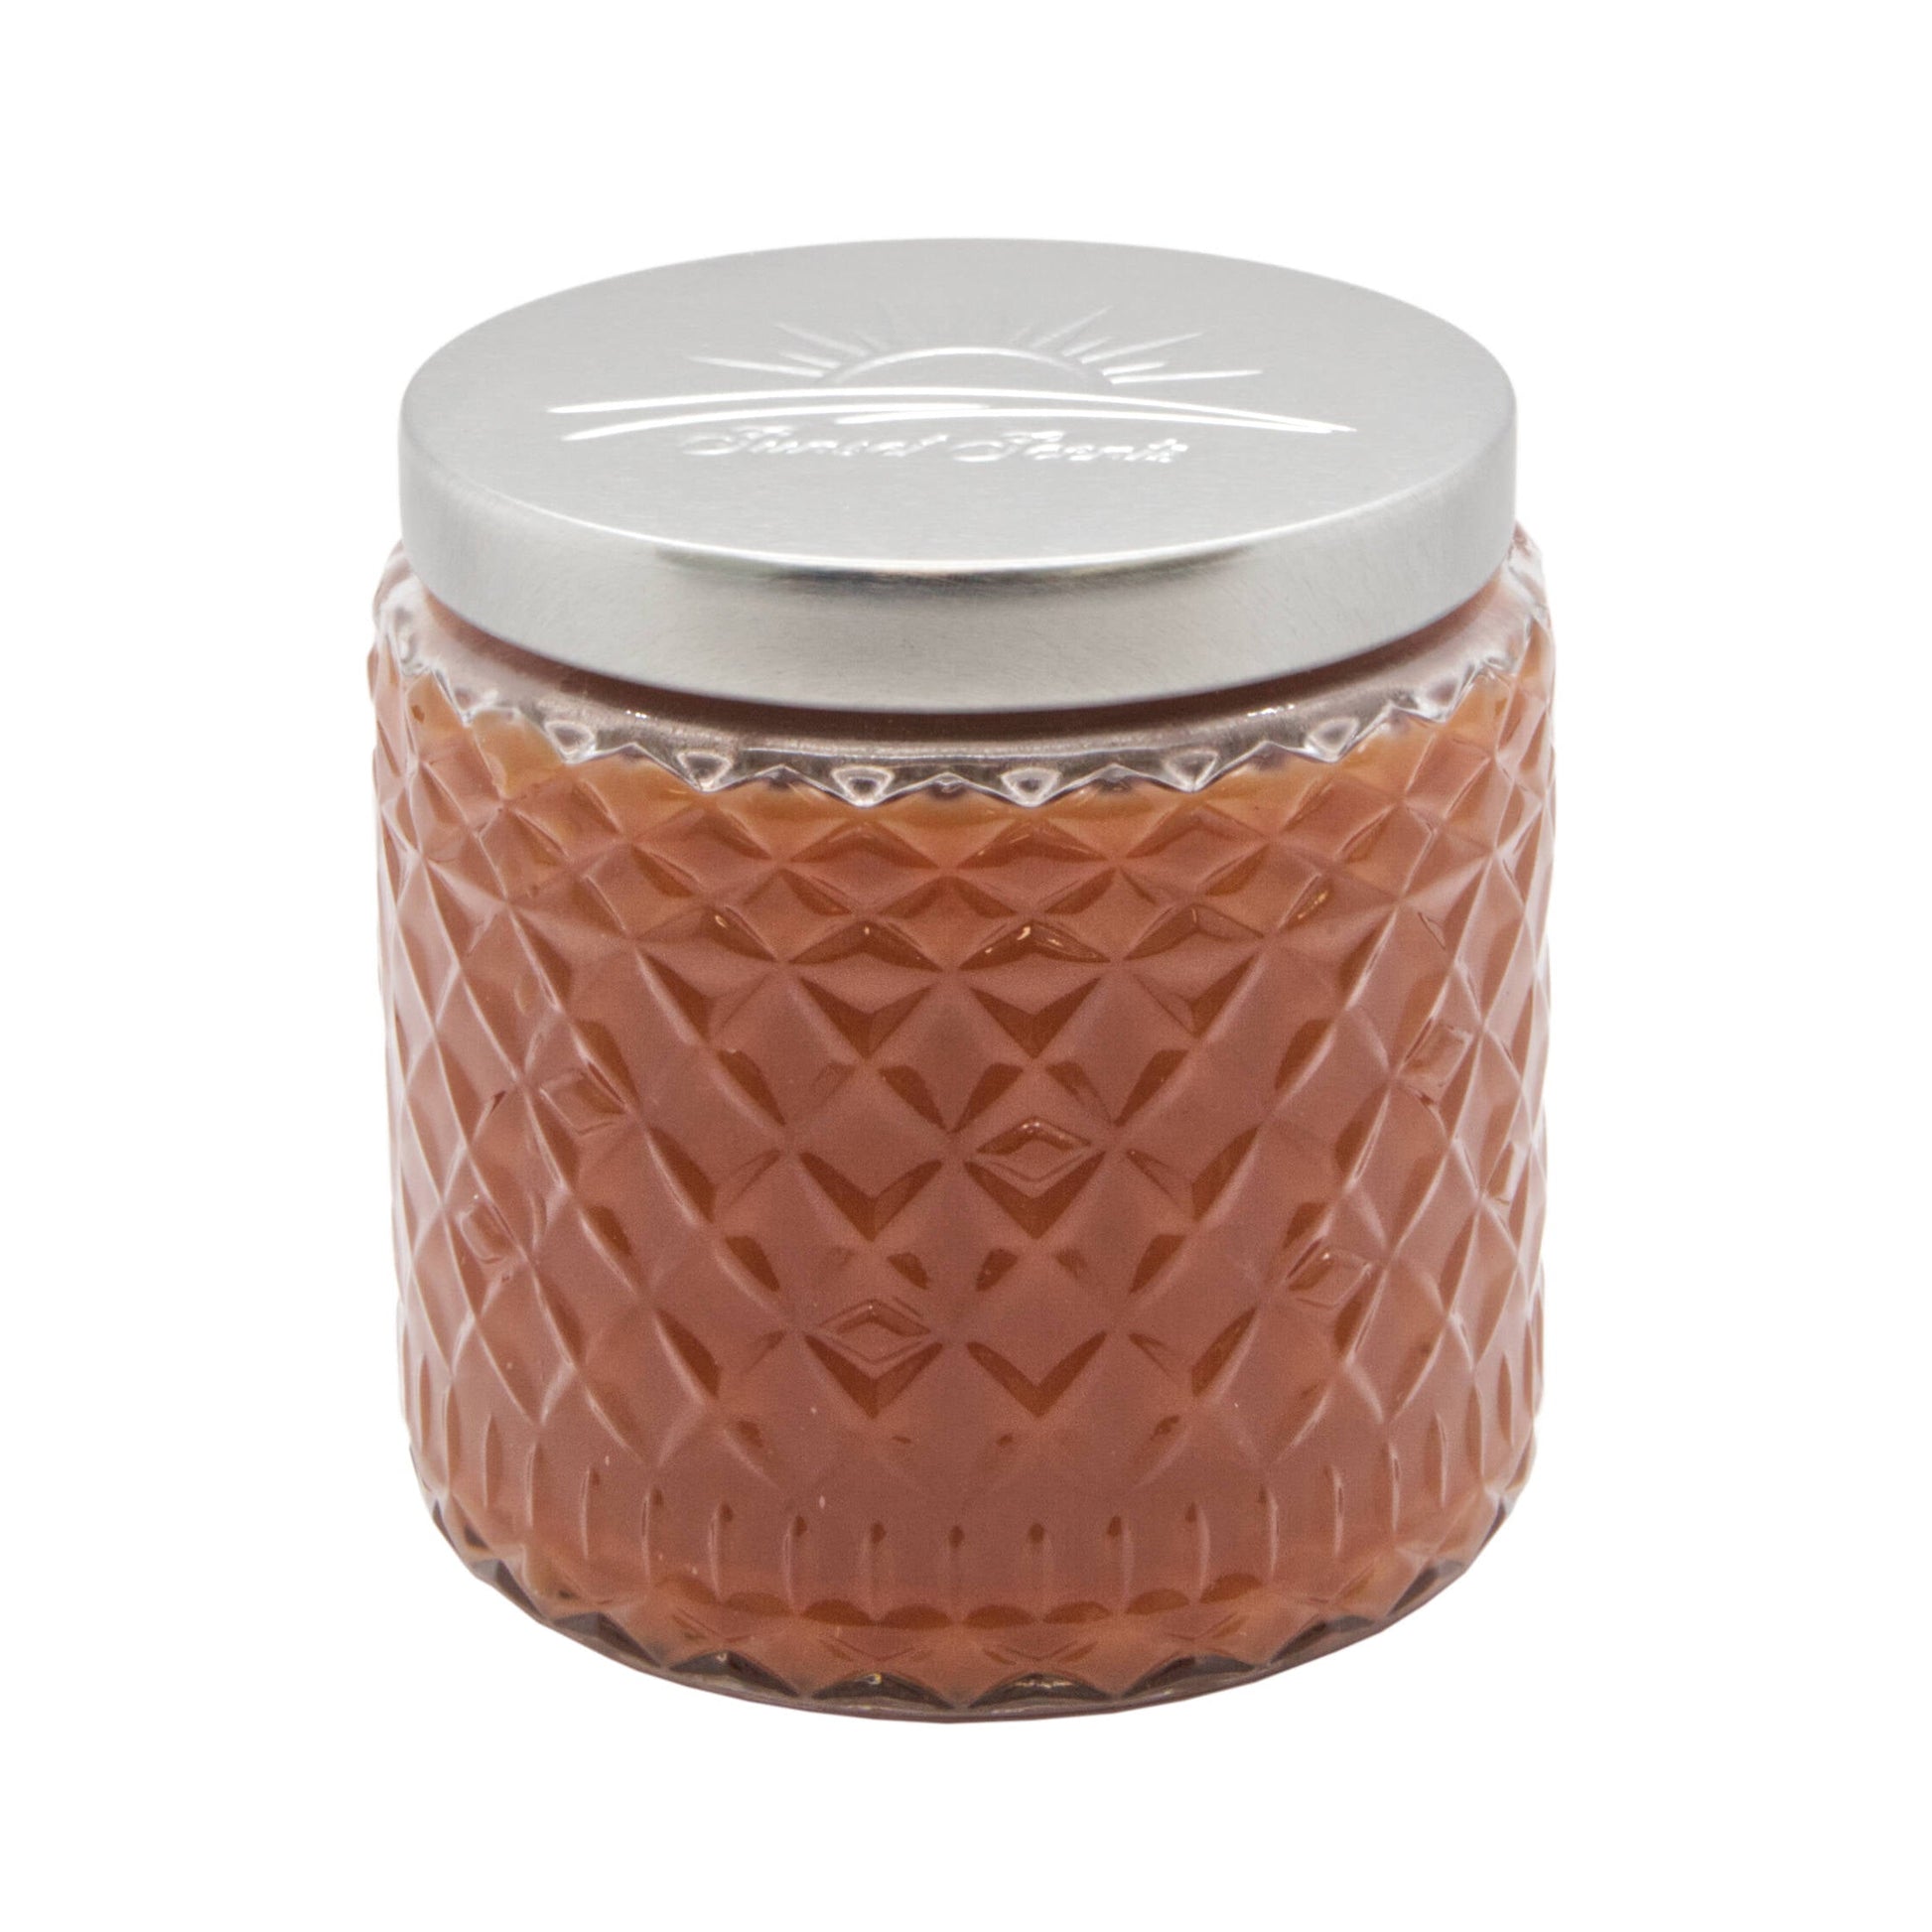 Ginger and Nutmeg Scented Candle